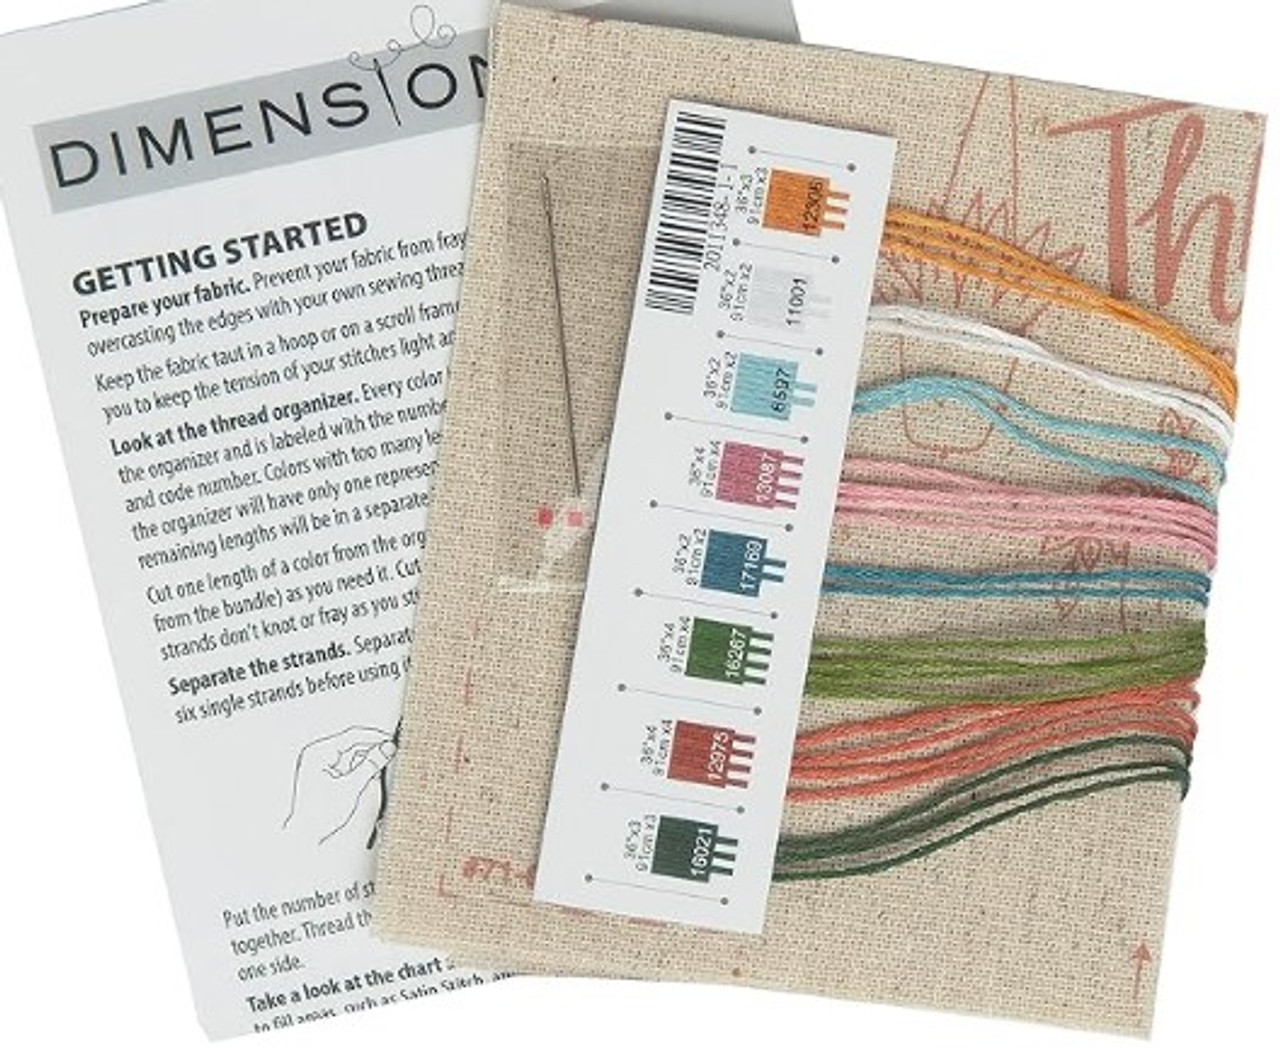 Dimensions Hang in There needlepoint embroidery Kit with fabric, needle & threads  5" x 7" finished